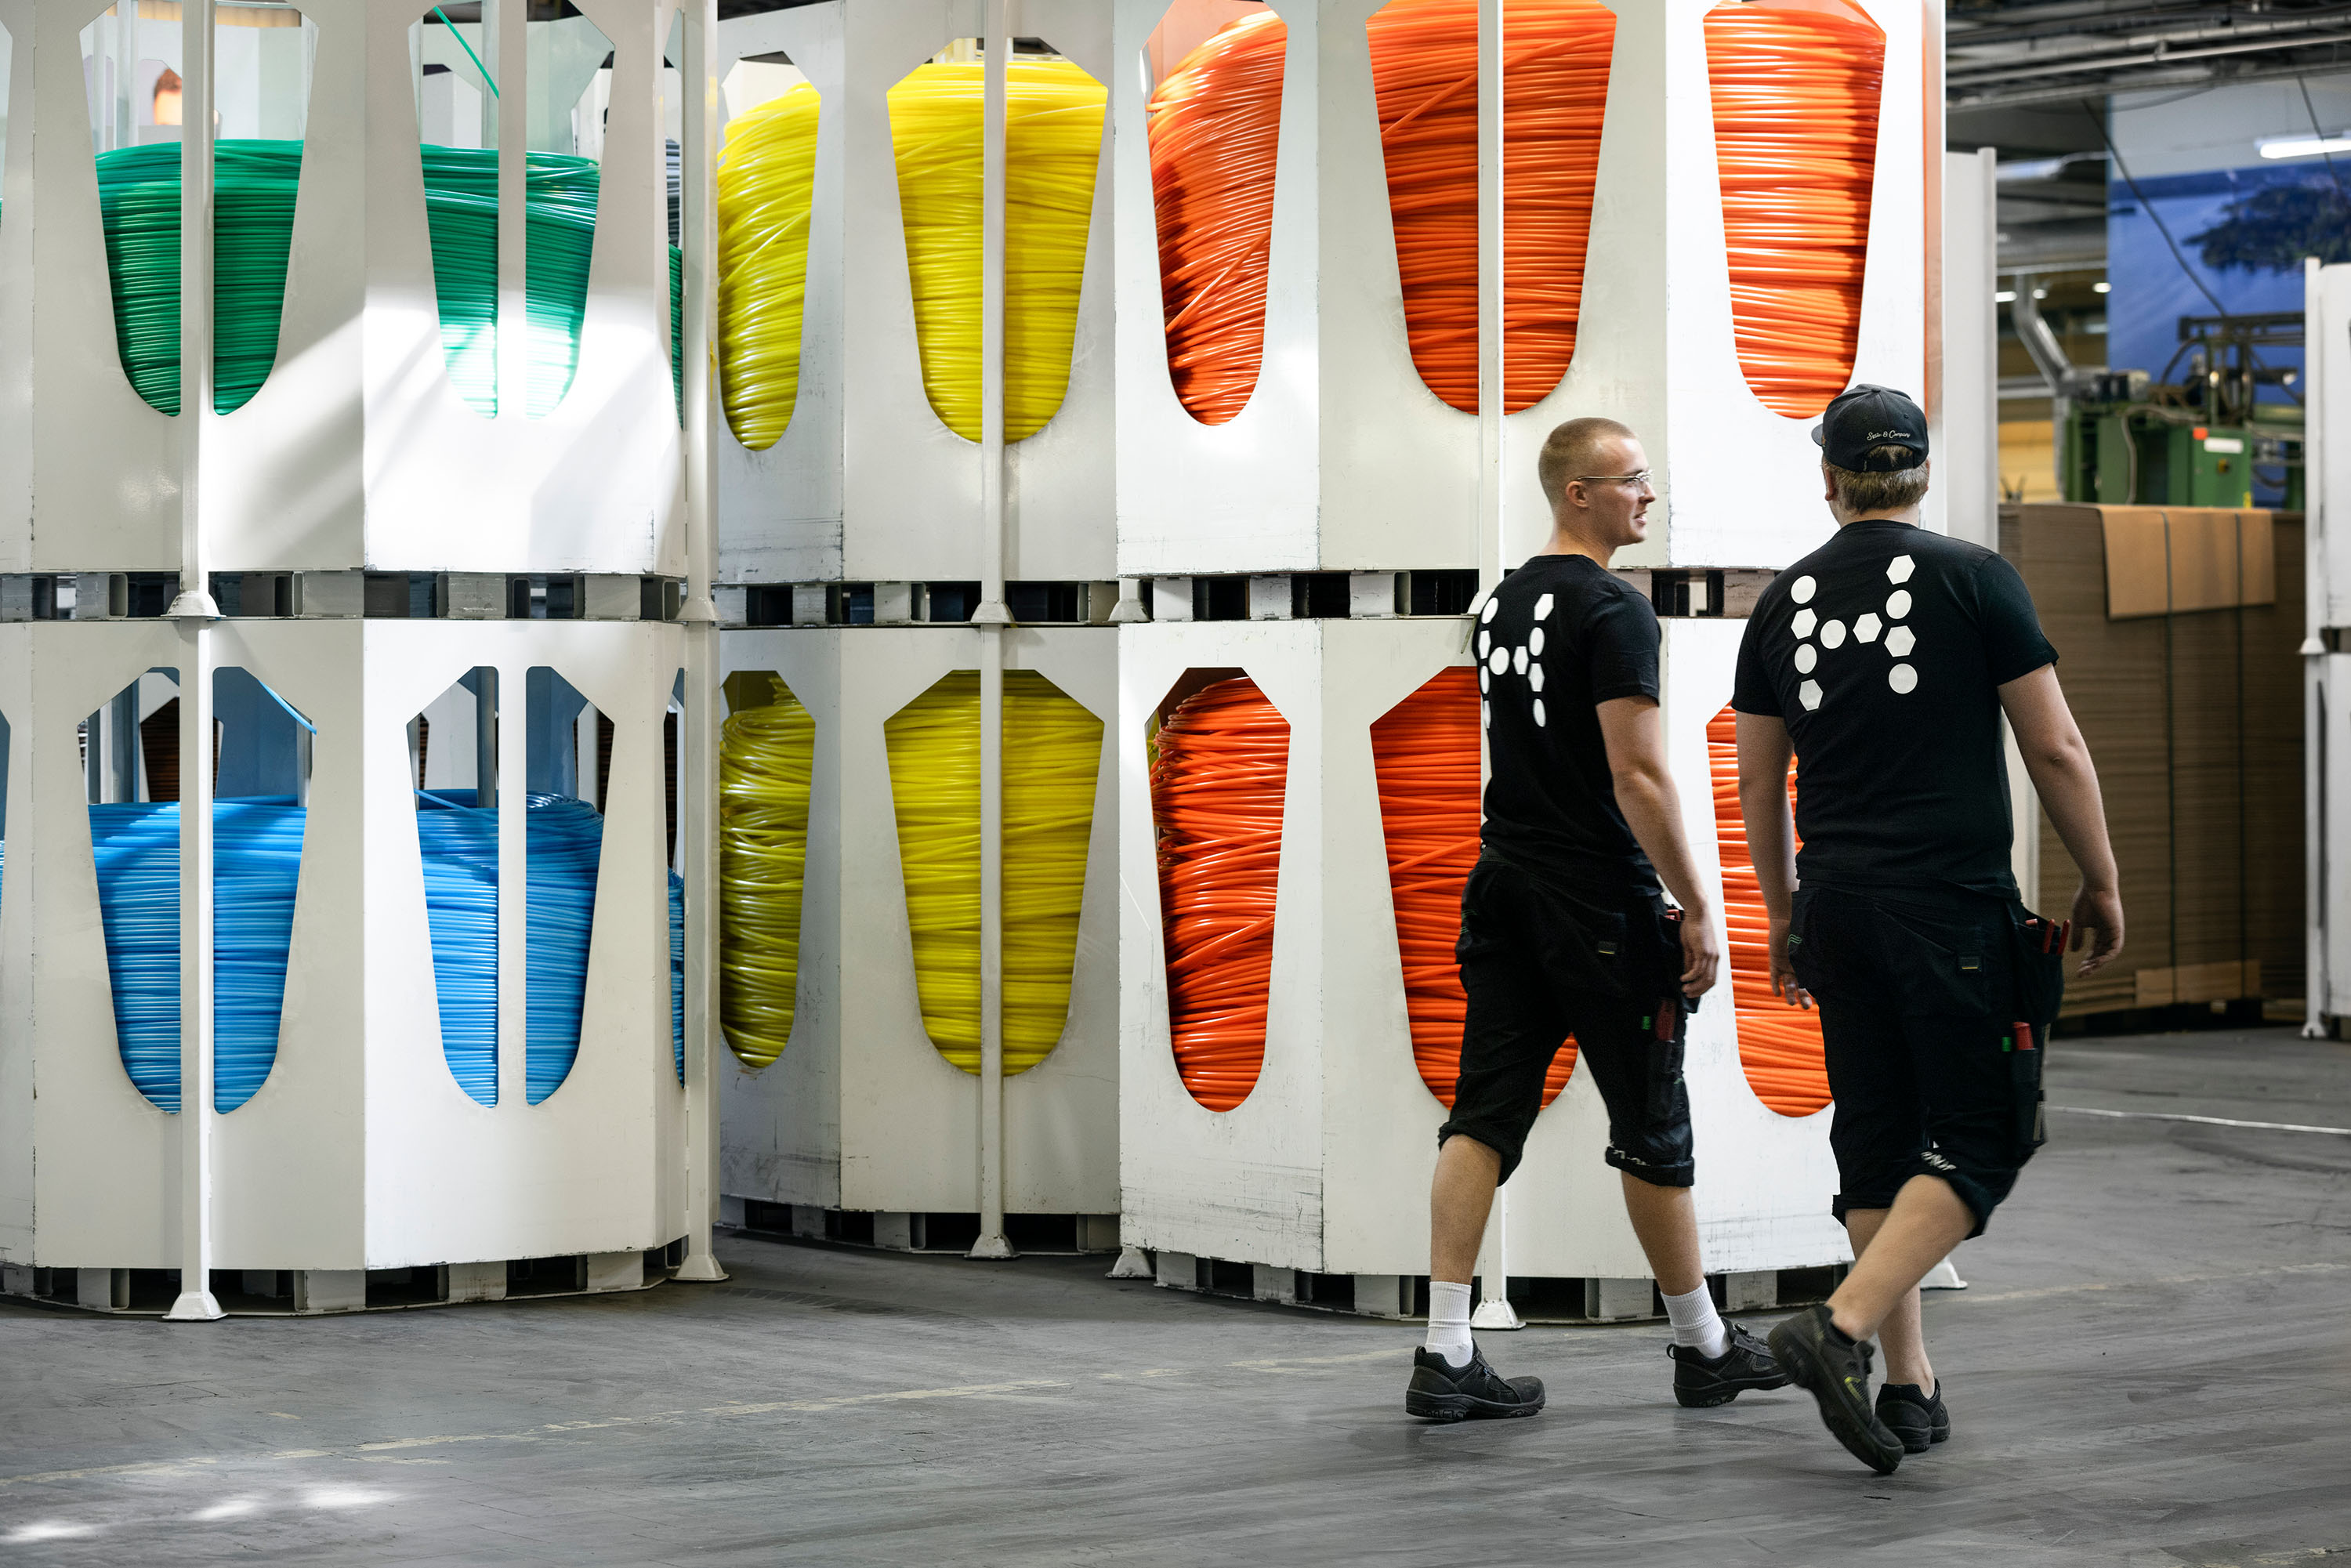 A warehouse with large spools of micro ducts in different colors. Two workers with black t-shirts with the Hexatronic logo on the back are walking by.